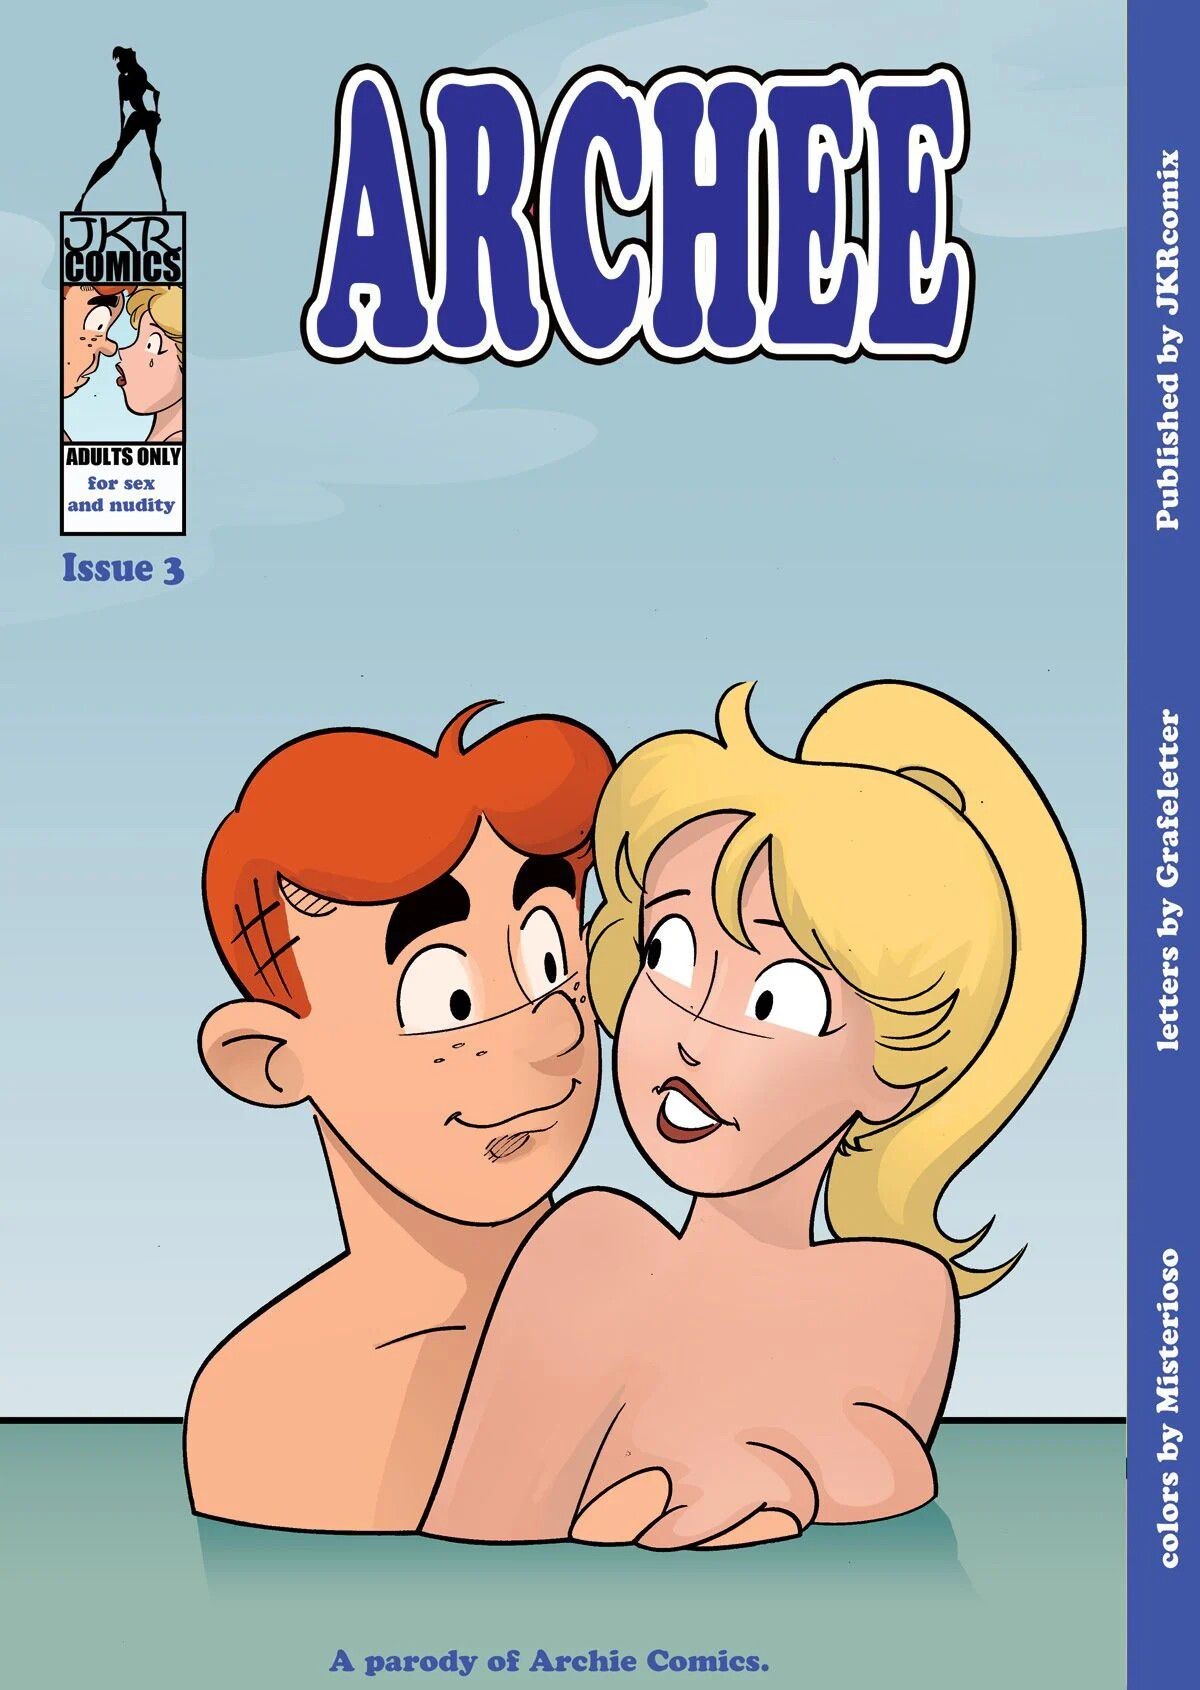 Sex Pussy Archee (Archies) [JKRComix] - 3 English Erotica